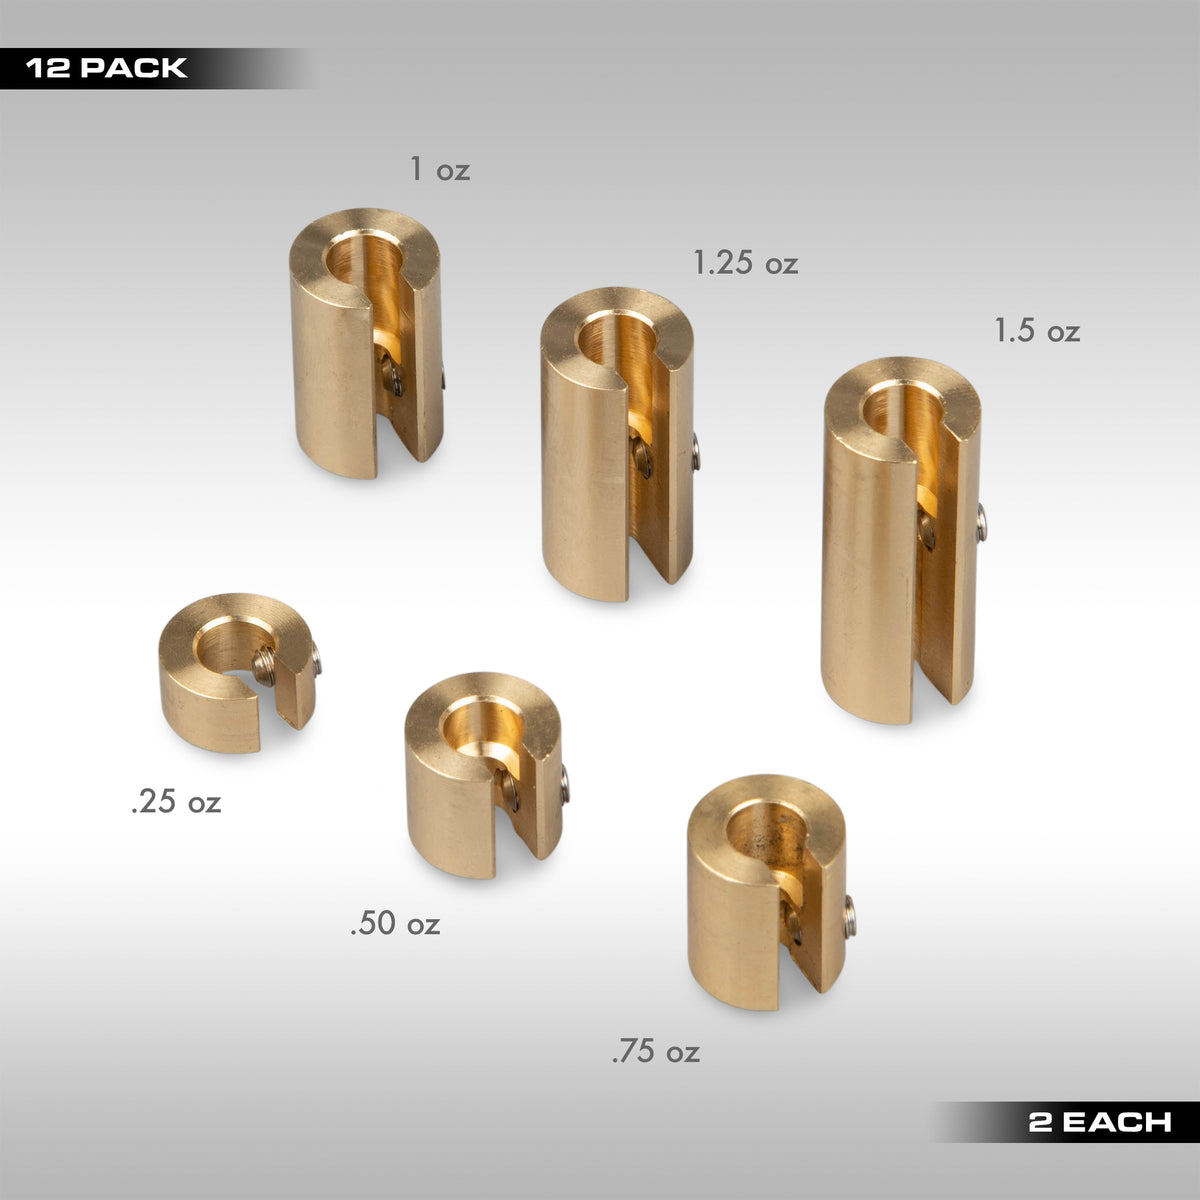 12 pack assortment with 2 of each size No-Mar wheel weights for balancing your motorcycle wheels. Machined brass weights are designed to lock onto the spokes with a set screw letting you get the perfect balance for your wheels. No Mar motorcycle wheel weights.